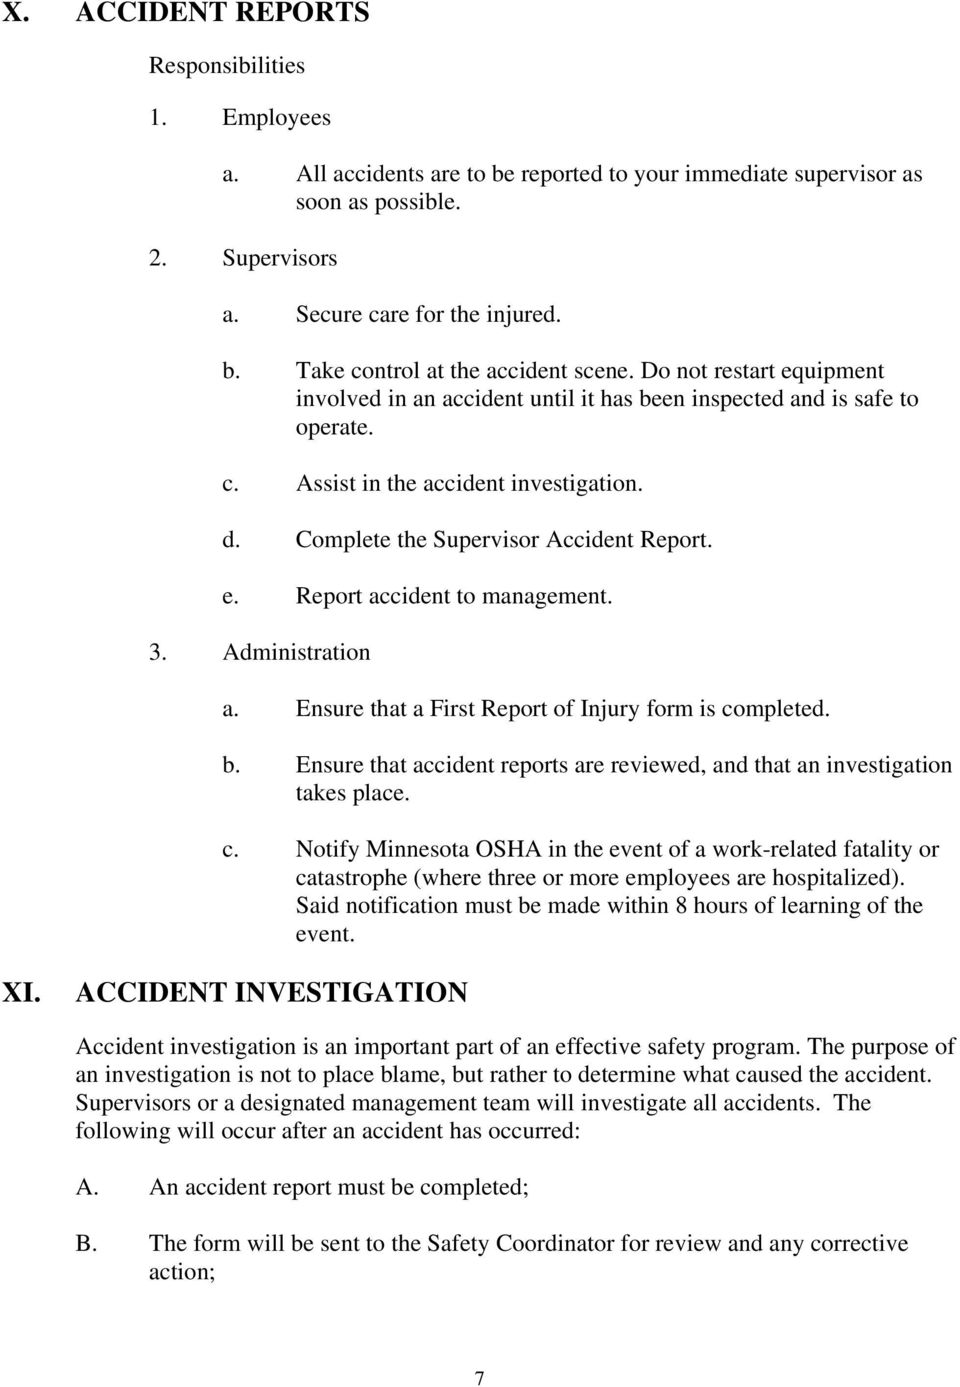 3. Administration a. Ensure that a First Report of Injury form is completed. b. Ensure that accident reports are reviewed, and that an investigation takes place. c. Notify Minnesota OSHA in the event of a work-related fatality or catastrophe (where three or more employees are hospitalized).